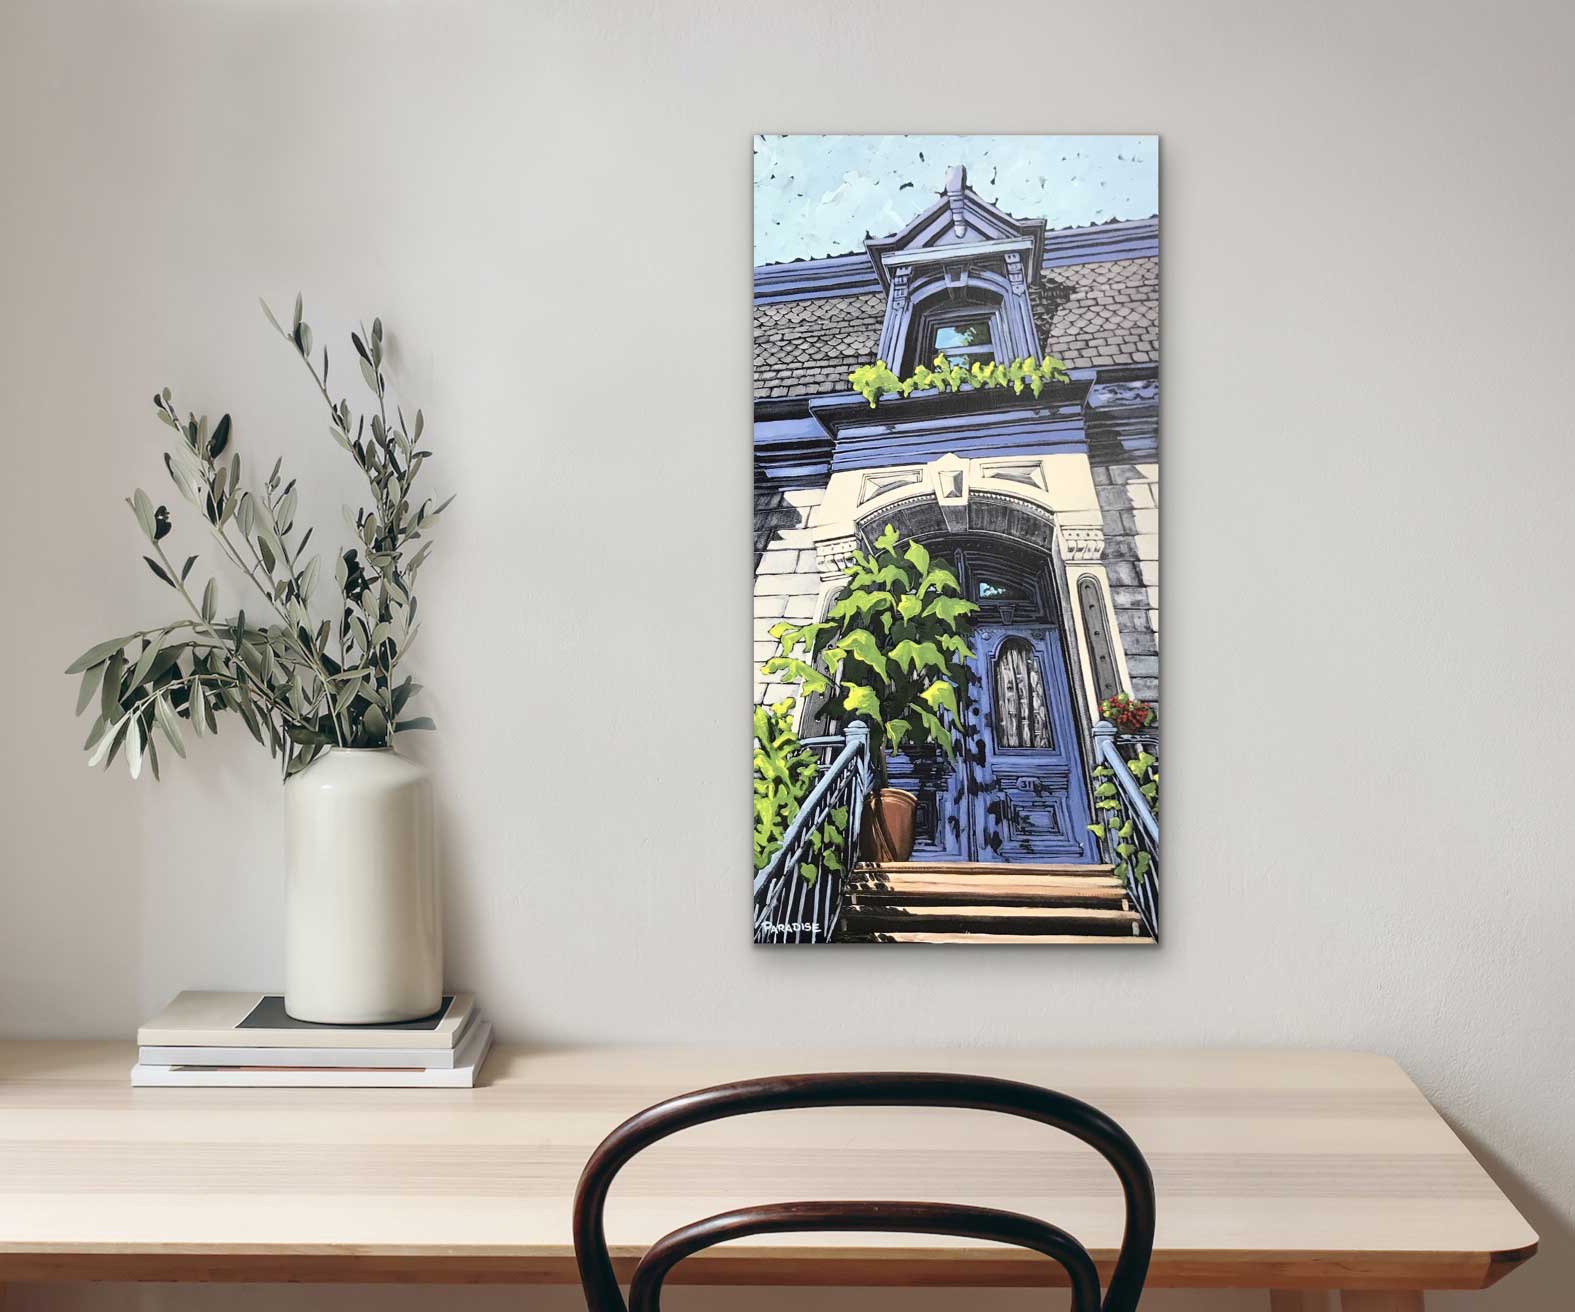 Carré Saint-Louis home in Montréal. Tall composition, high quality giclee print on canvas from an Original painting by a professional Canadian landscape artist. visual art ready to hang on your wall.